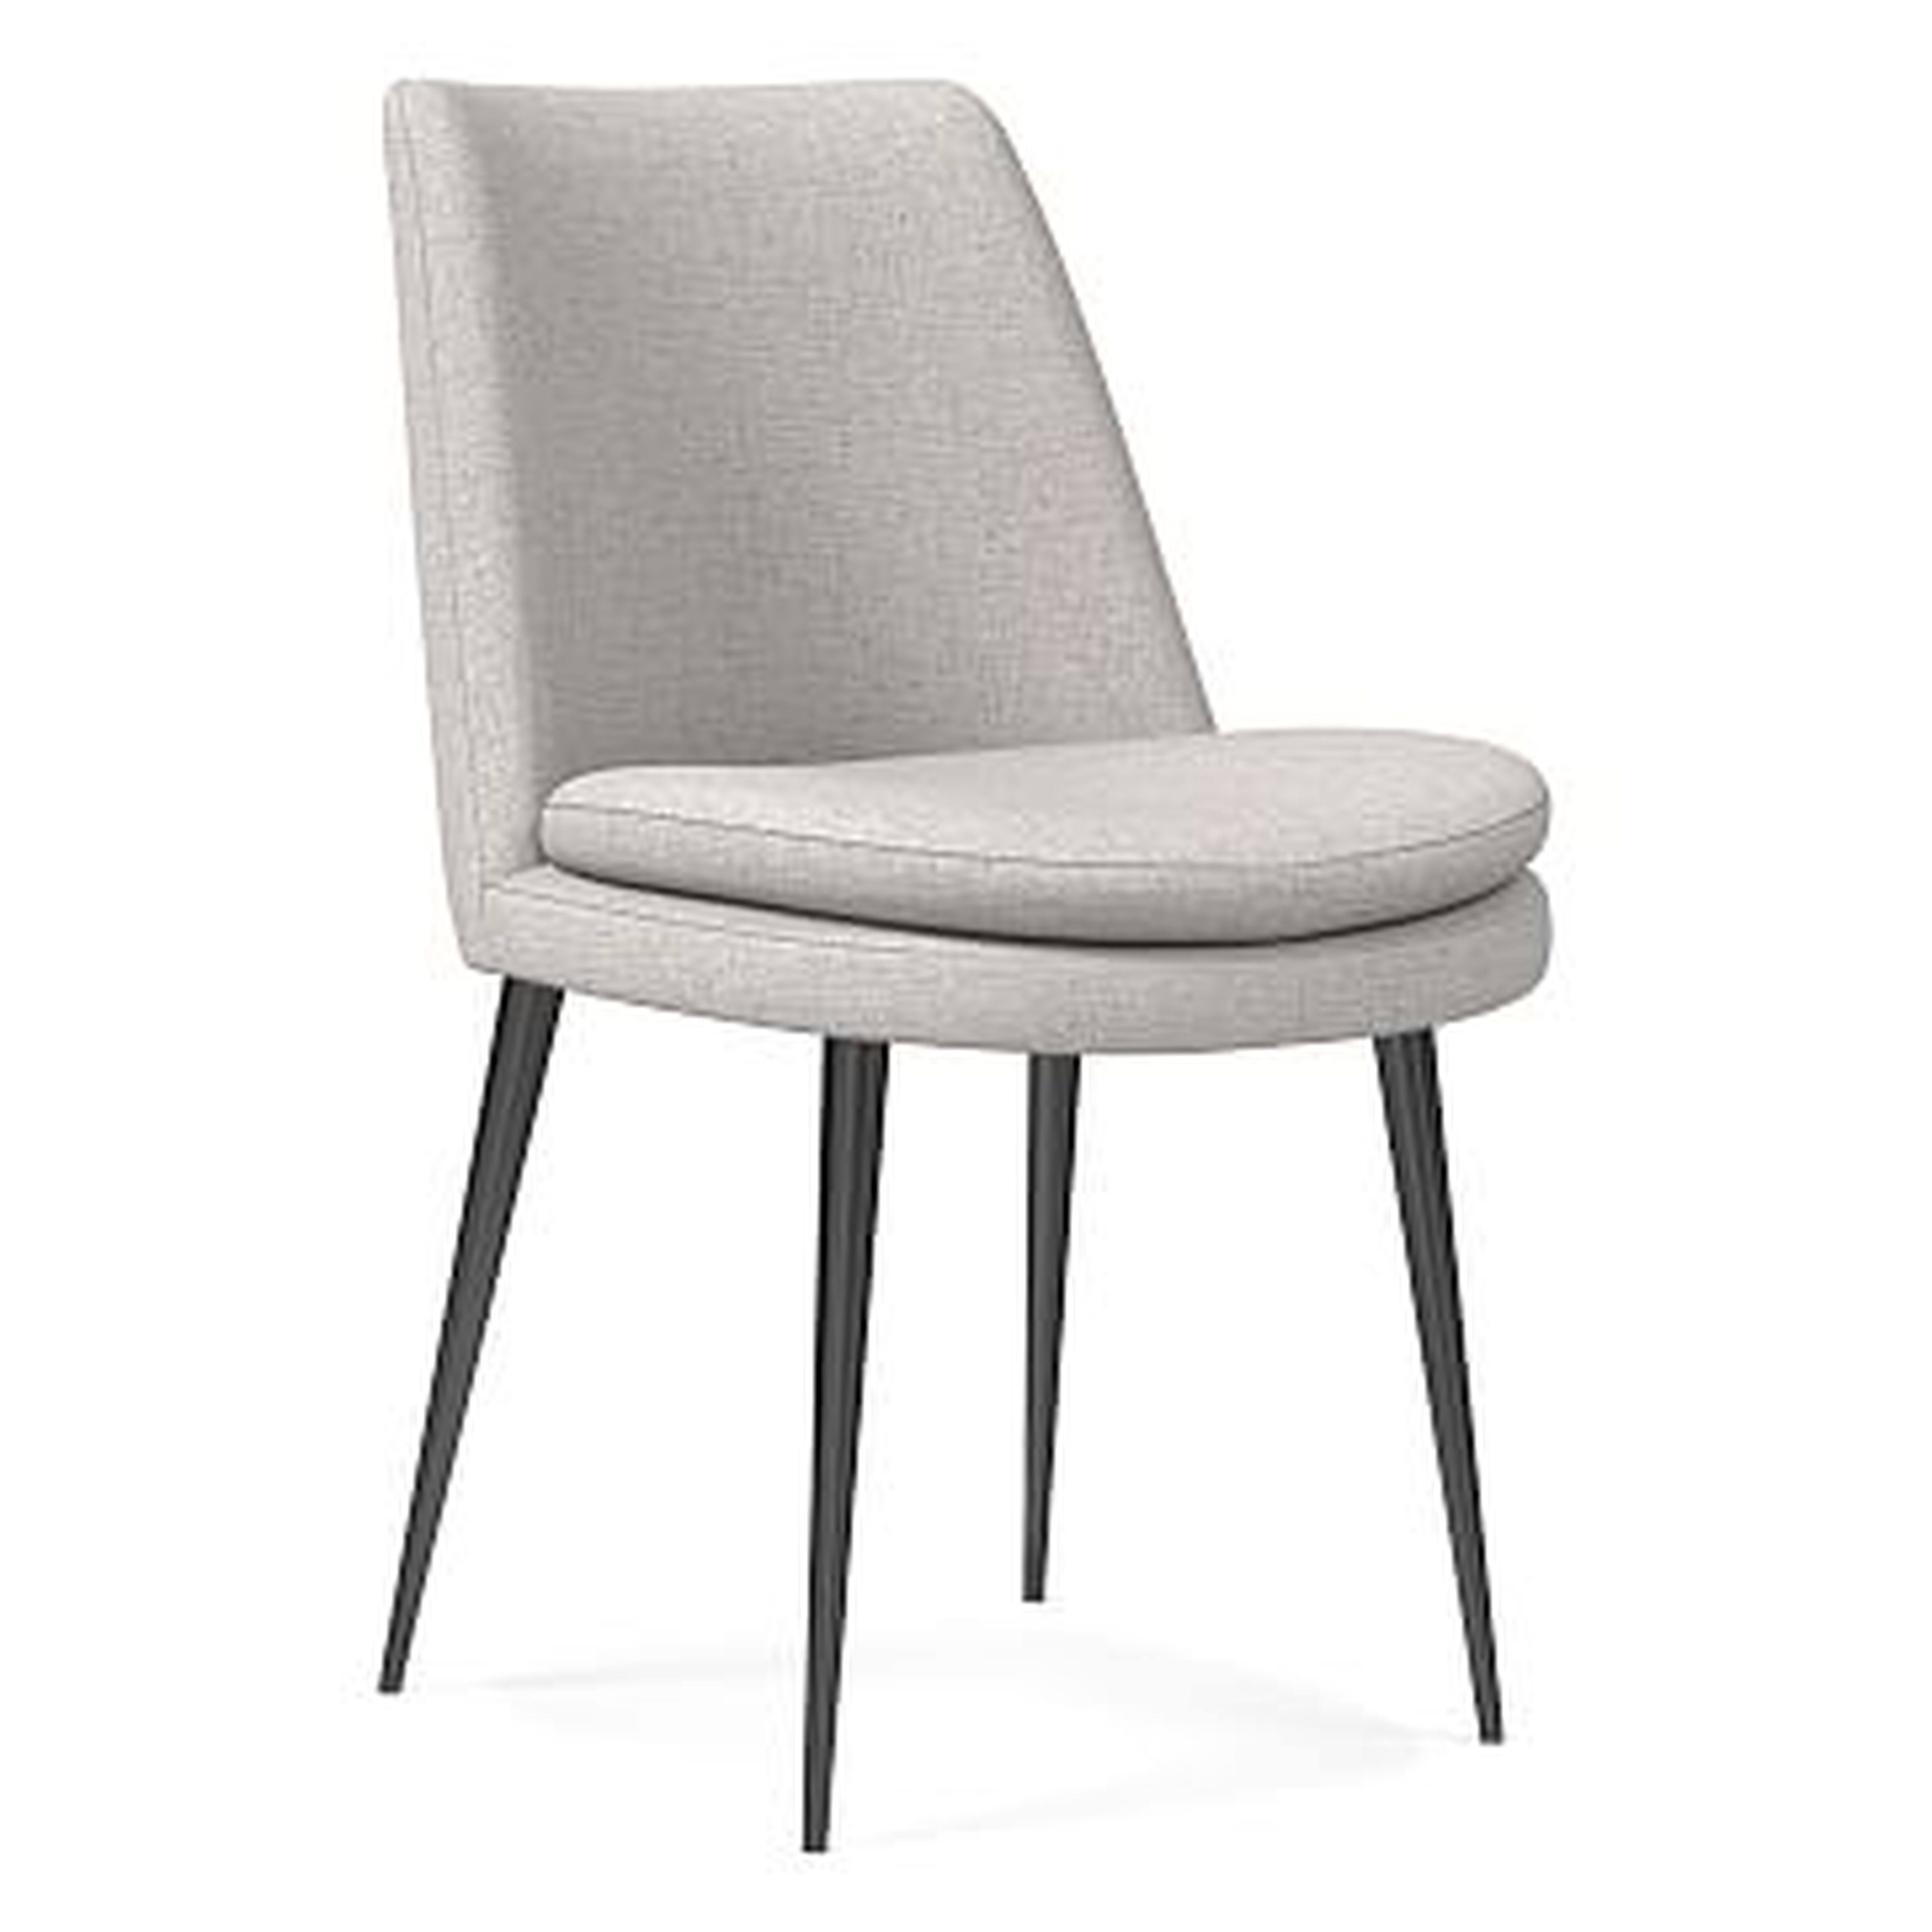 Finley Low Back Dining Chair,Individual, Performance Coastal Linen, Dove, Gunmetal - West Elm